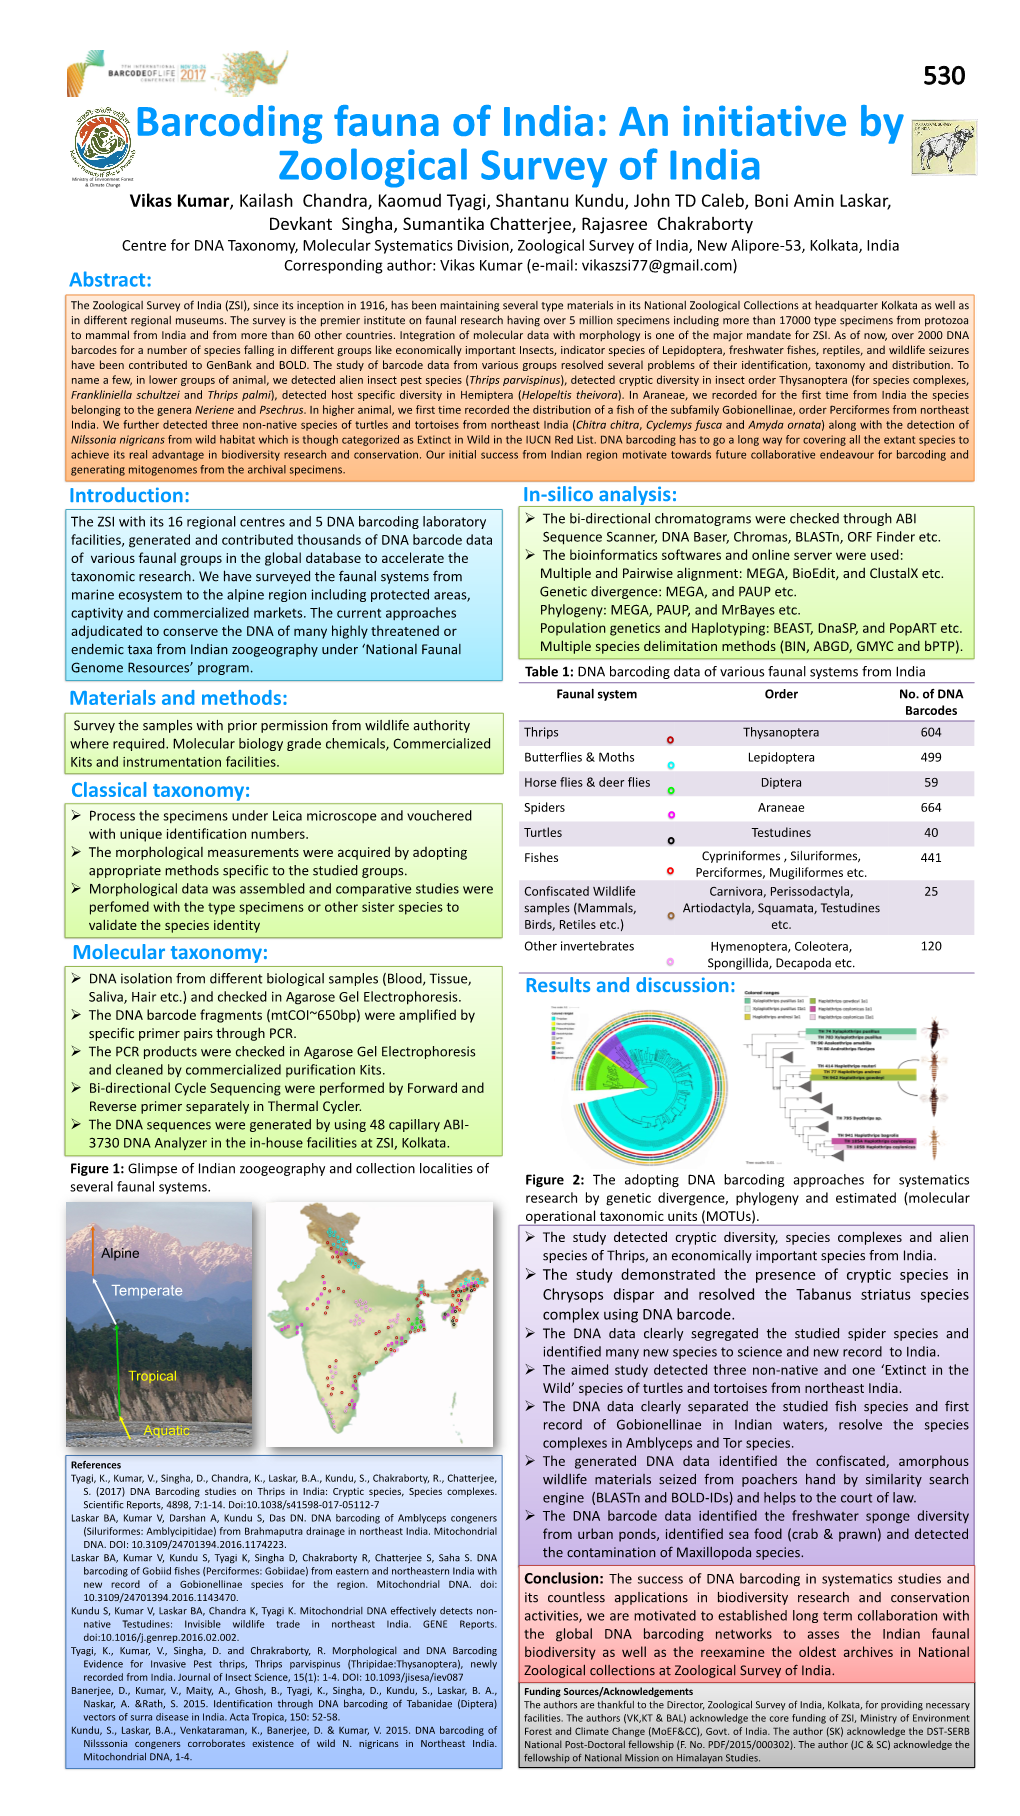 Barcoding Fauna of India: an Initiative by Zoological Survey of India